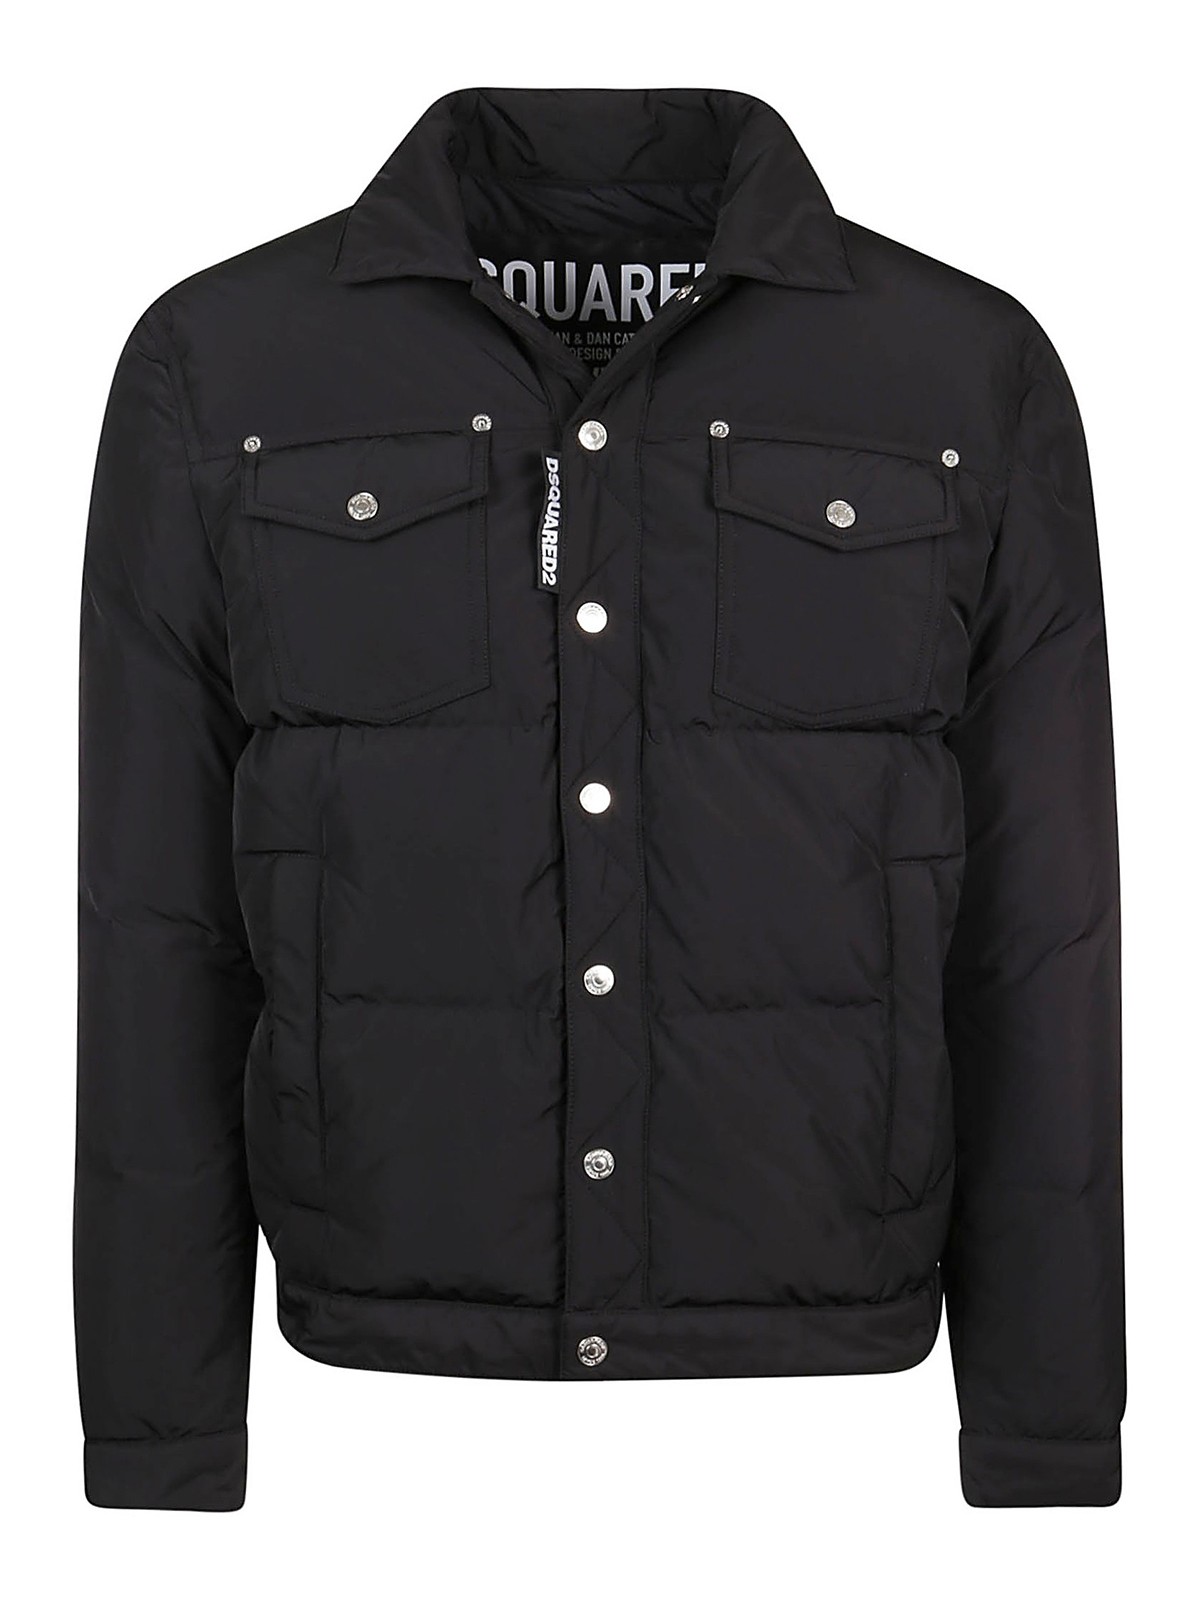 dsquared2 quilted jacket